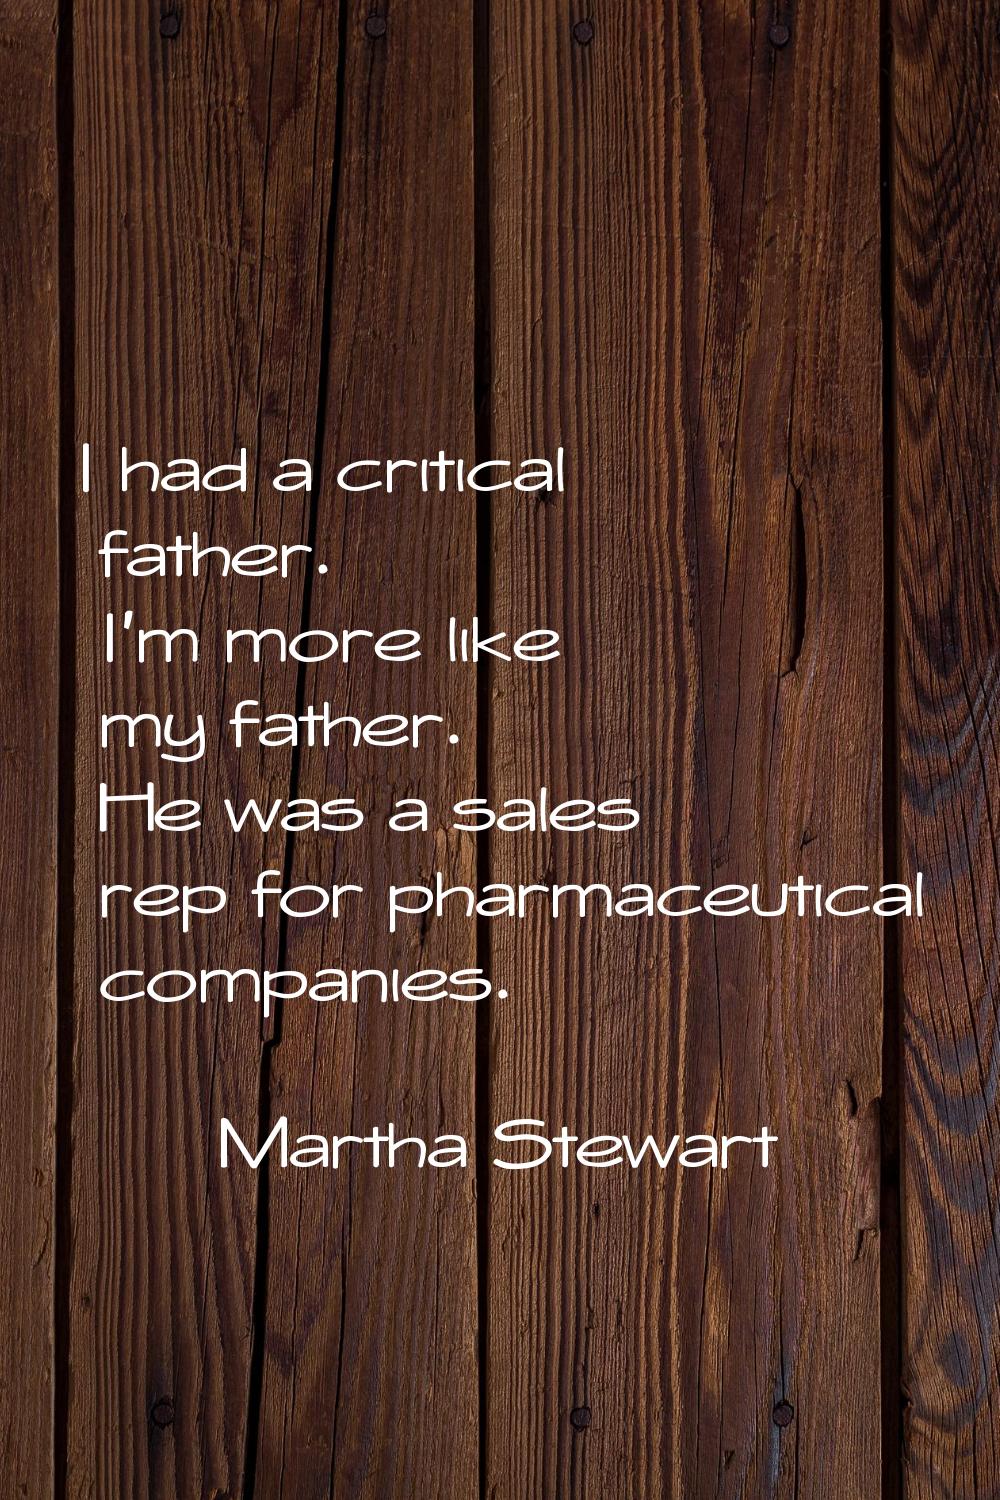 I had a critical father. I'm more like my father. He was a sales rep for pharmaceutical companies.